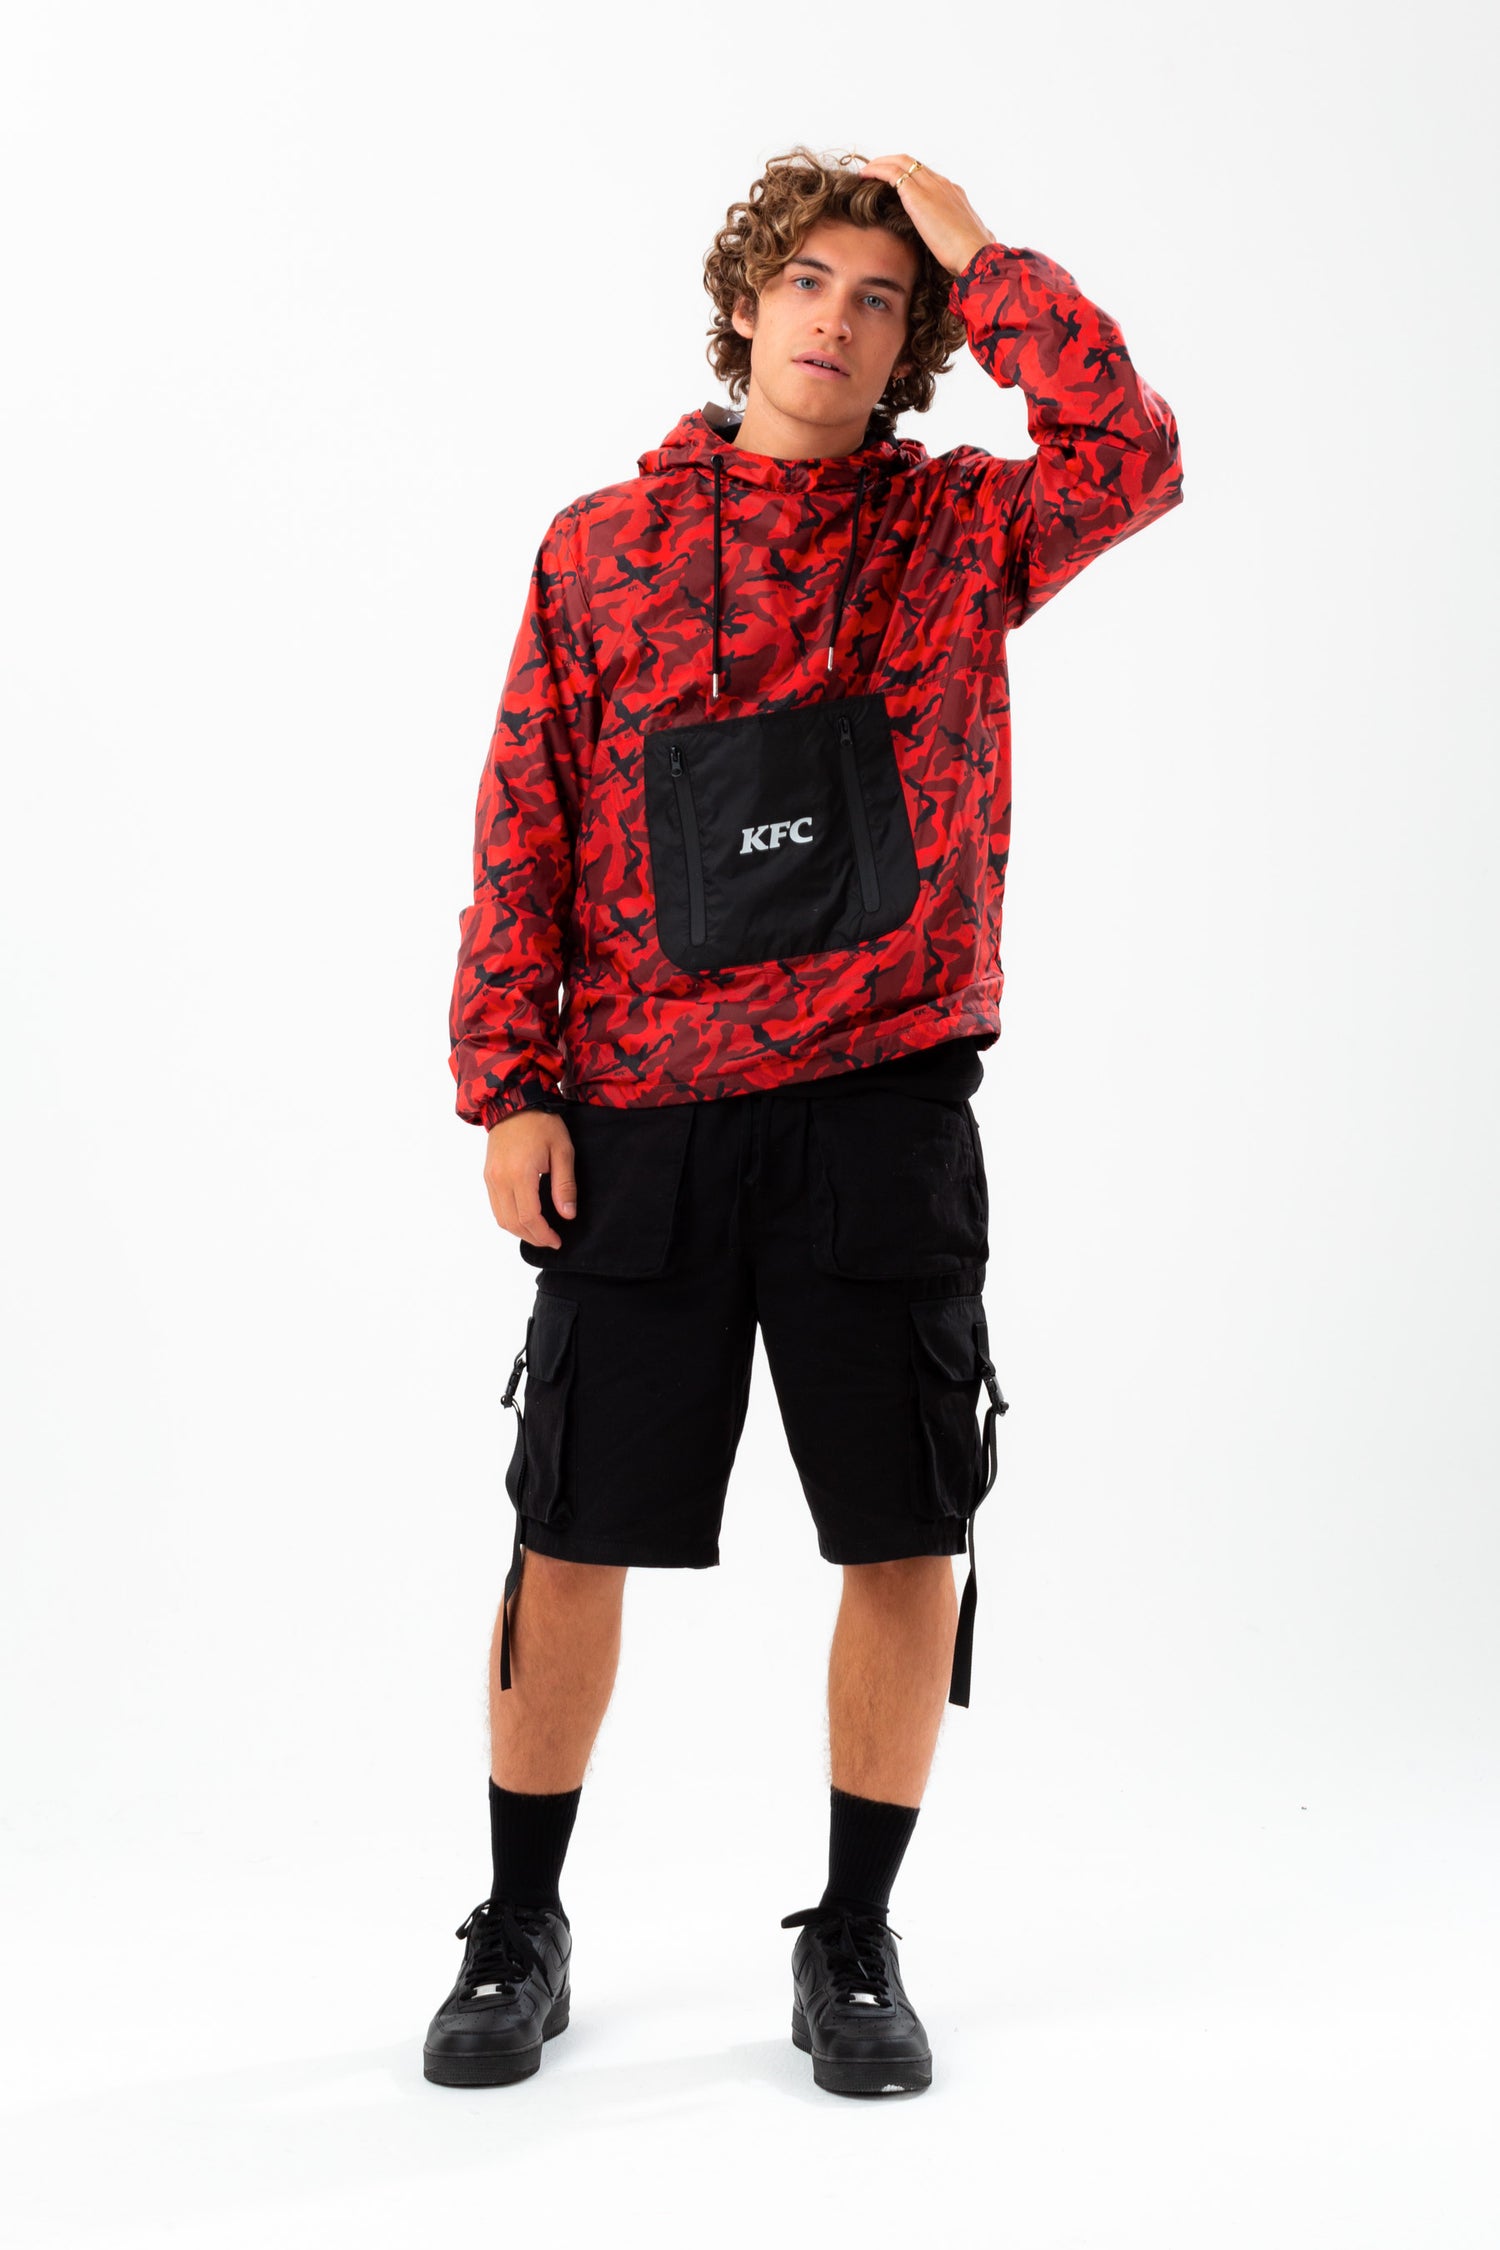 HYPE X KFC RED CAMOUFLAGE LIGHTWEIGHT ADULT JACKET